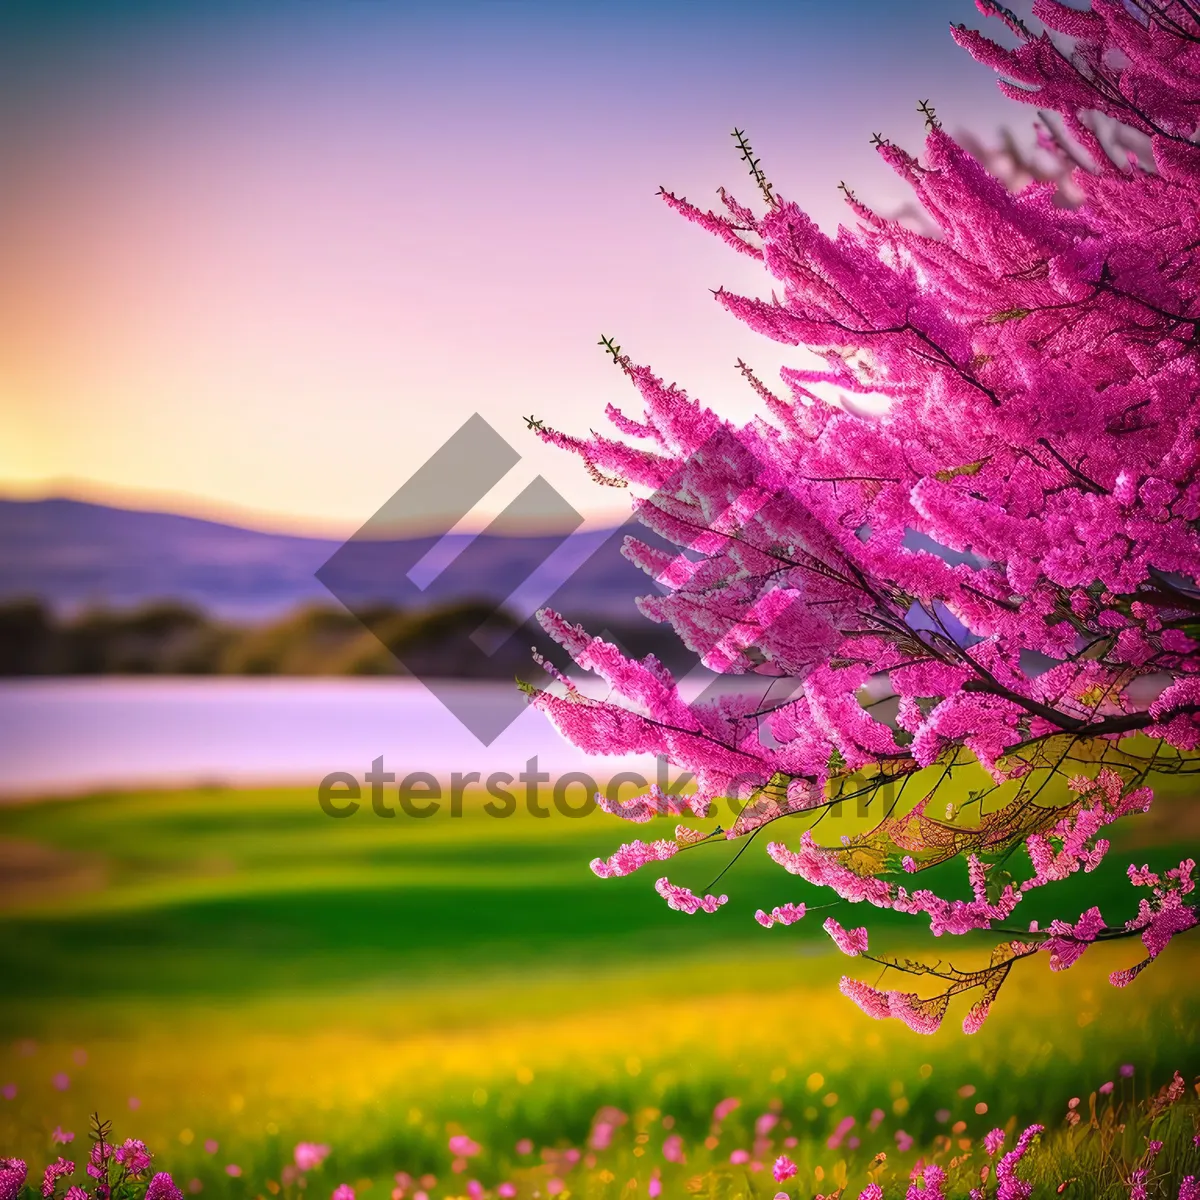 Picture of Pink Maple Sky: A Colorful Digital Art Glow